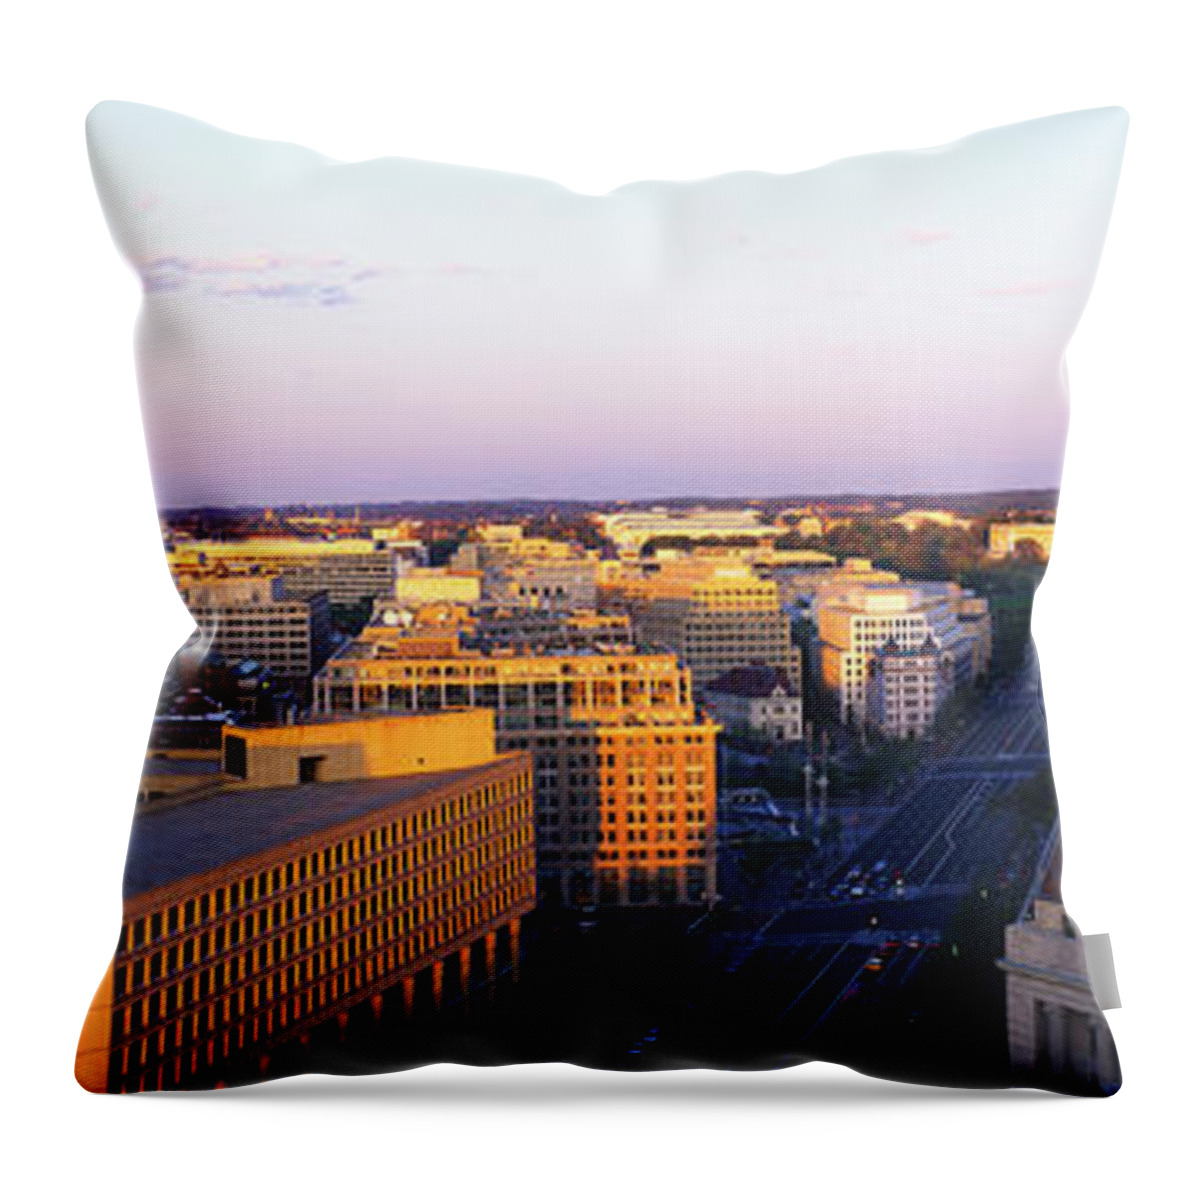 Photography Throw Pillow featuring the photograph Pennsylvania Ave Washington Dc by Panoramic Images